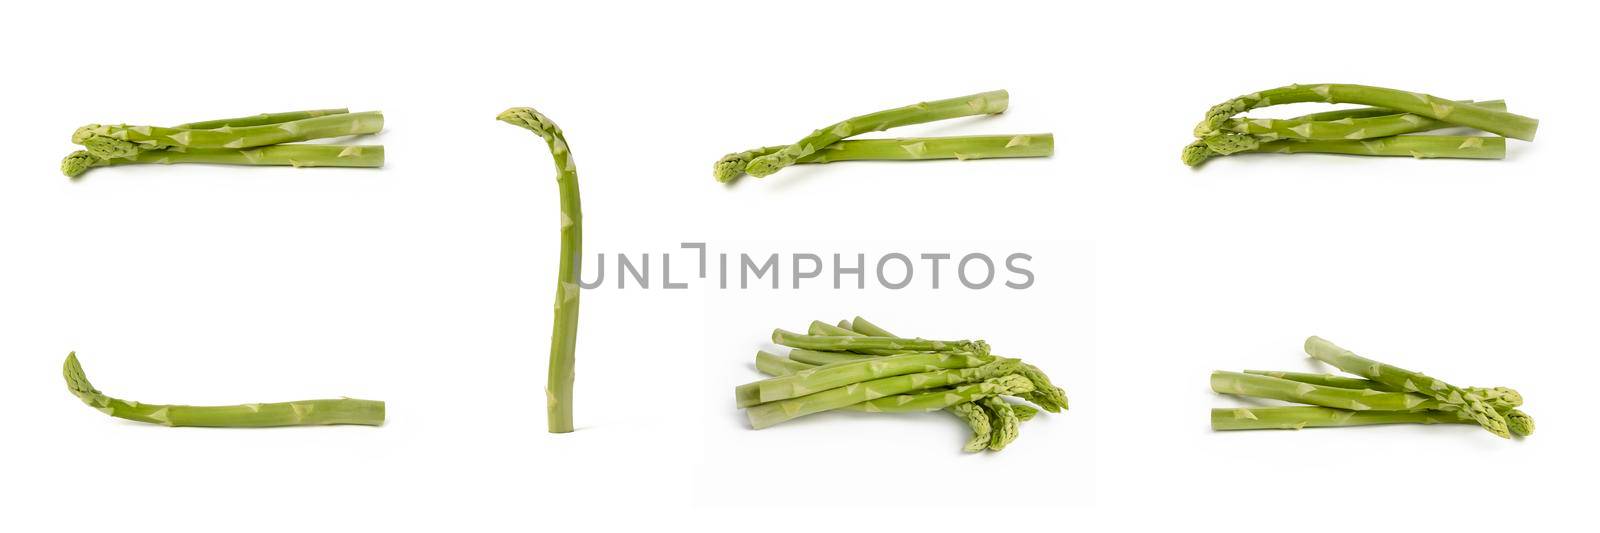 Bunch of fresh green asparagus isolated on white background. Big set freshly picked asparagus with water drops isolated on white background